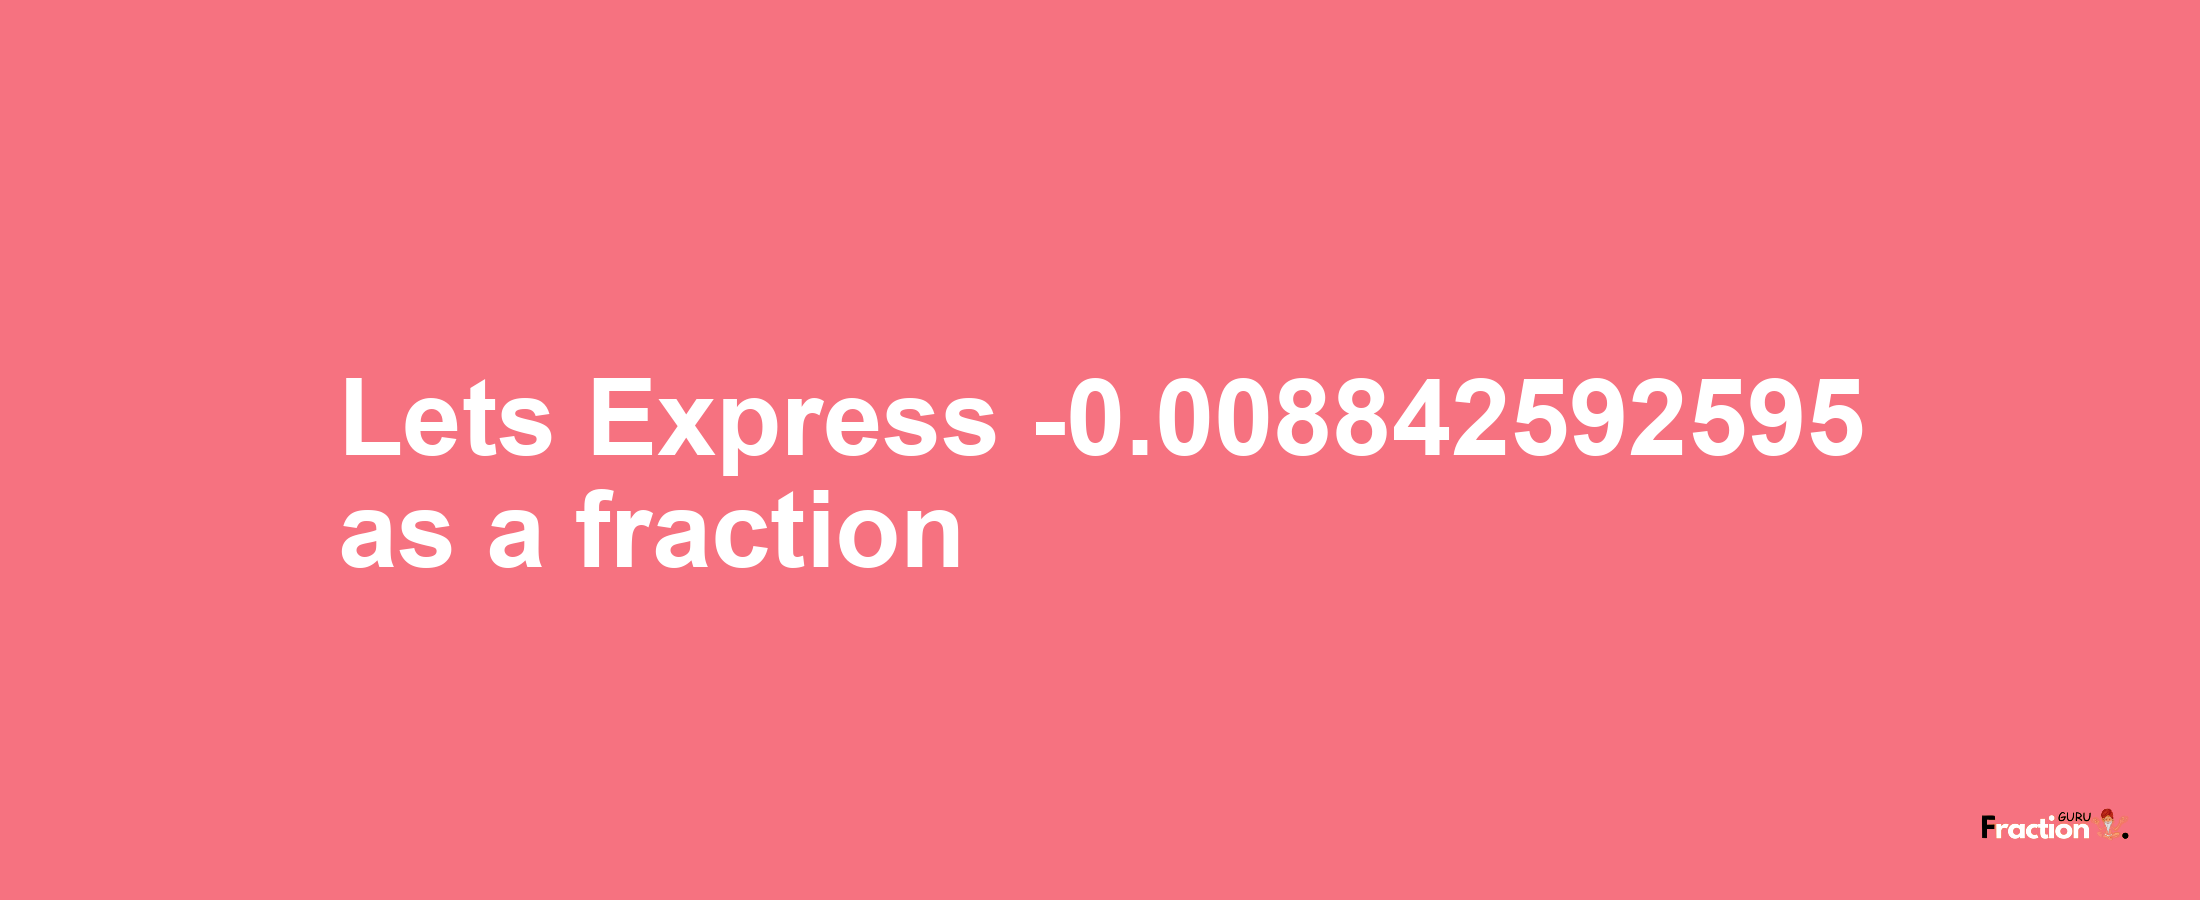 Lets Express -0.008842592595 as afraction